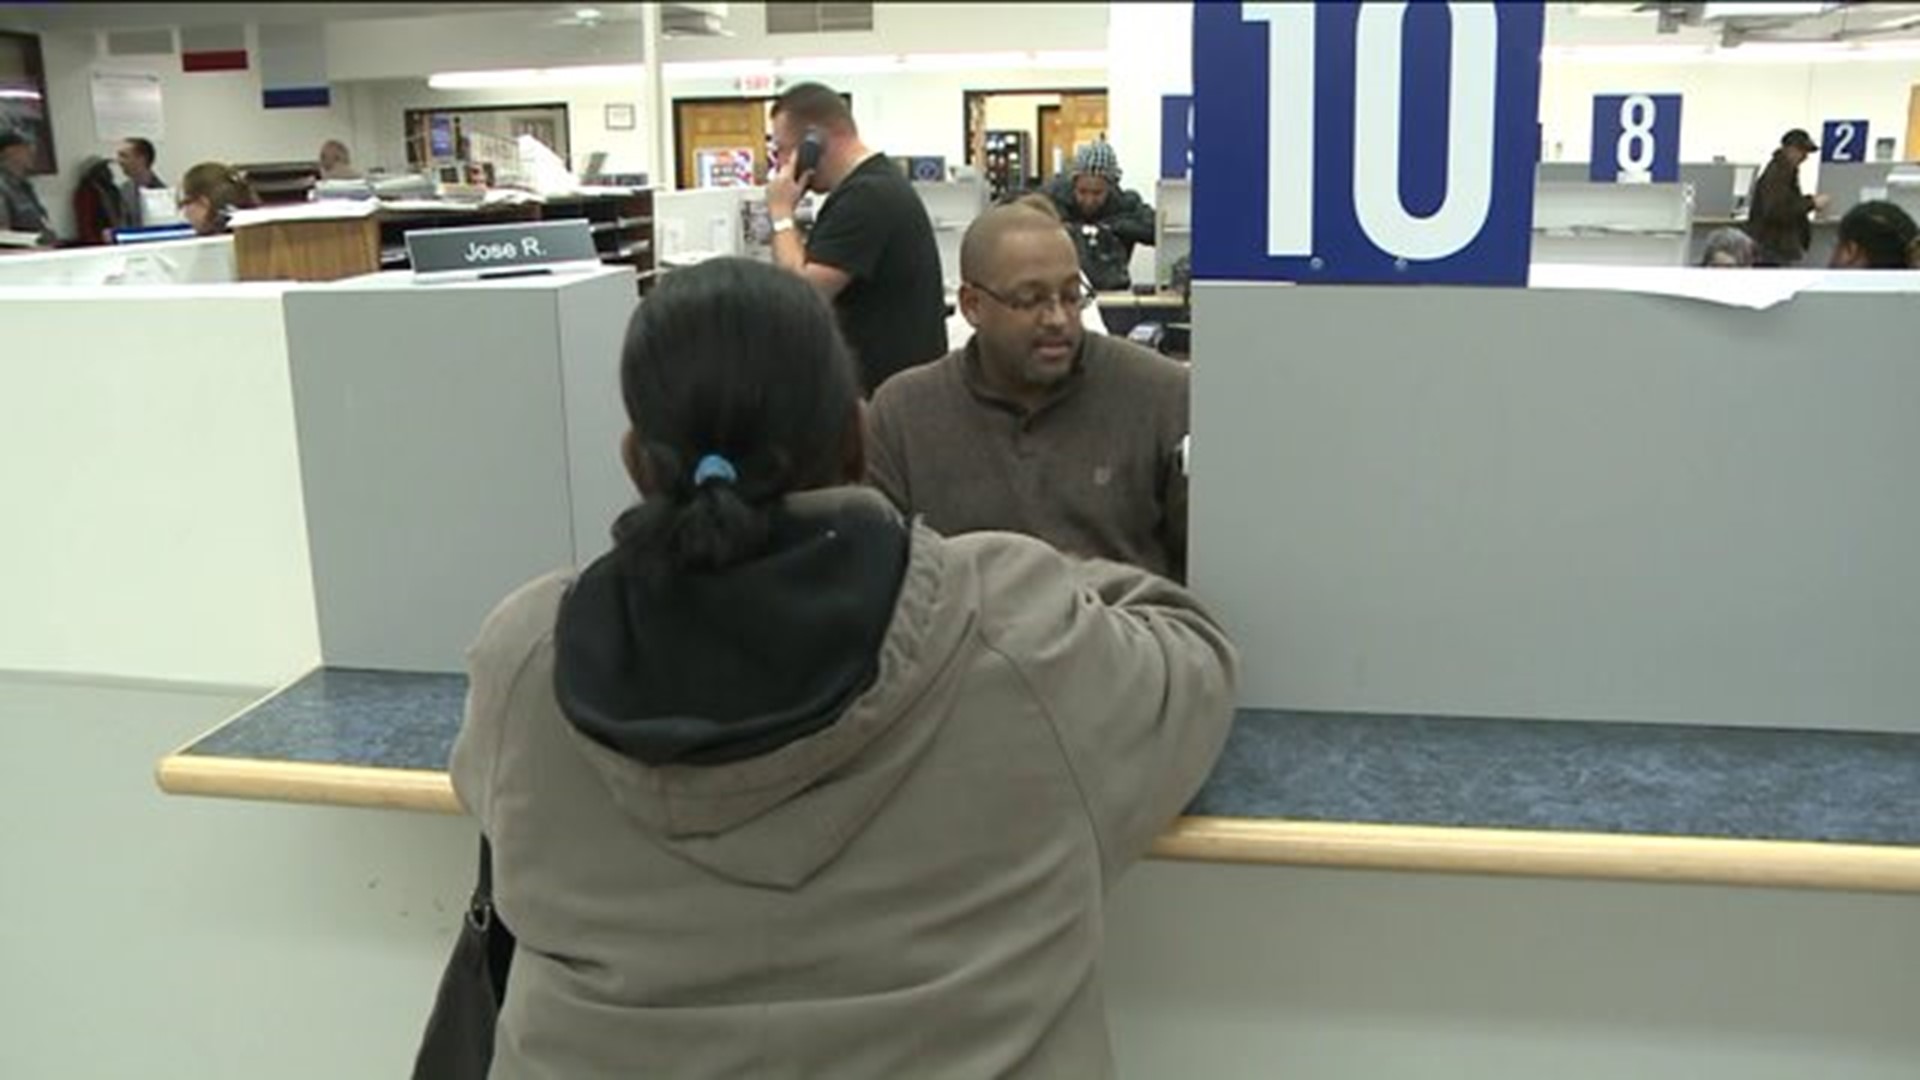 Changes proposed to make DMV more efficient